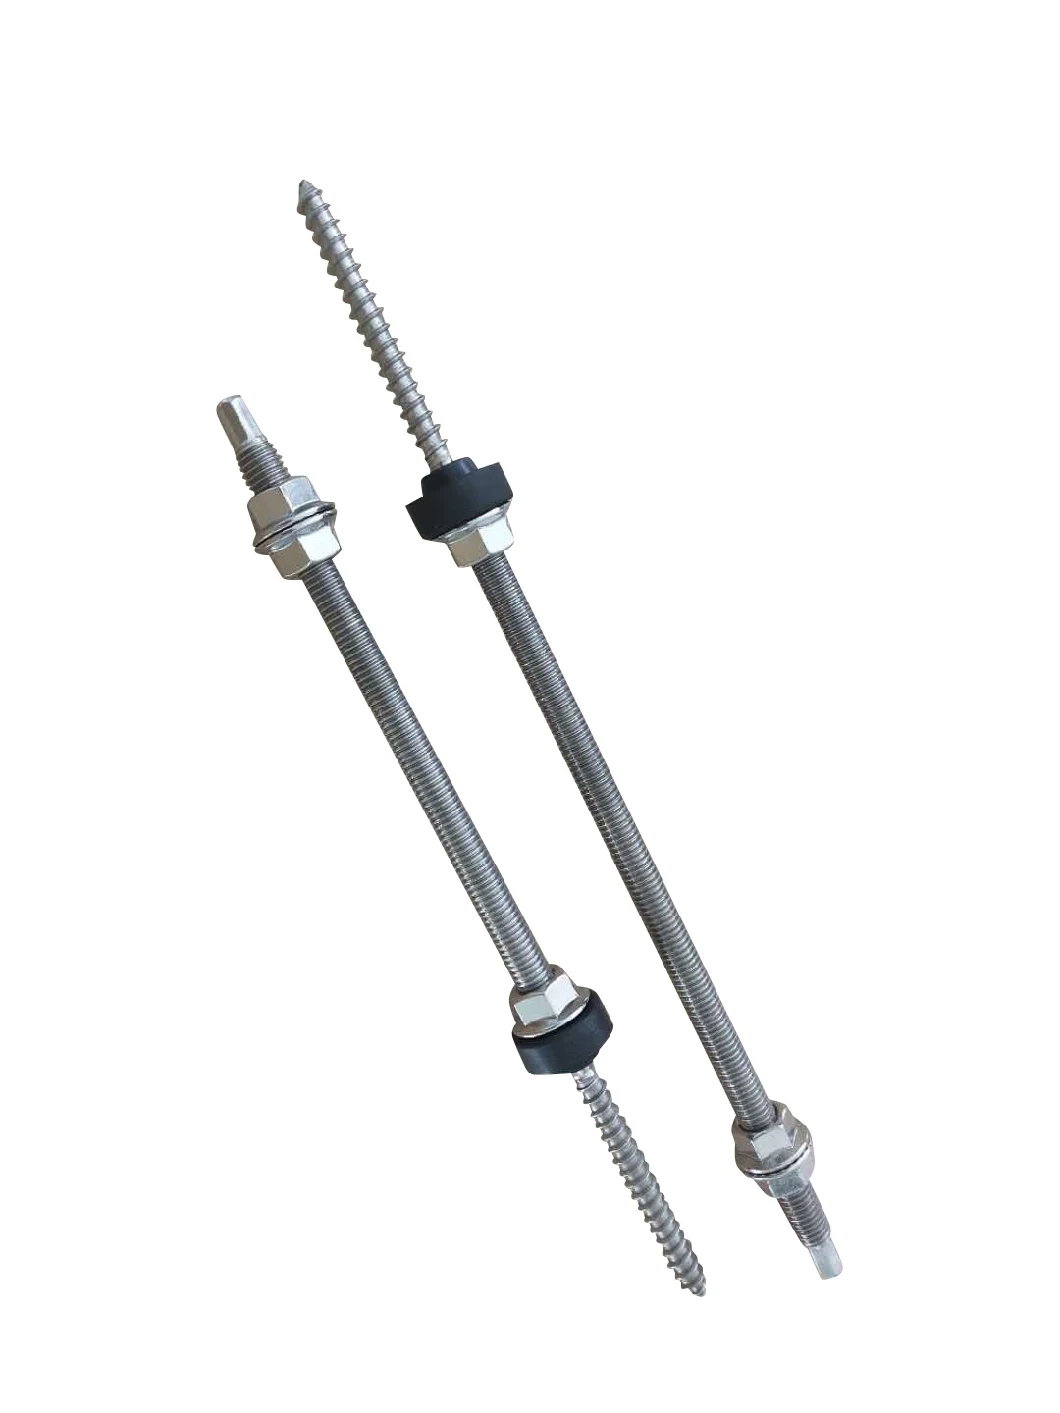 Stainless A2/304 Customized Dowel Bolts Assembled with DIN6923 Flange Nuts and EPDM Gasket